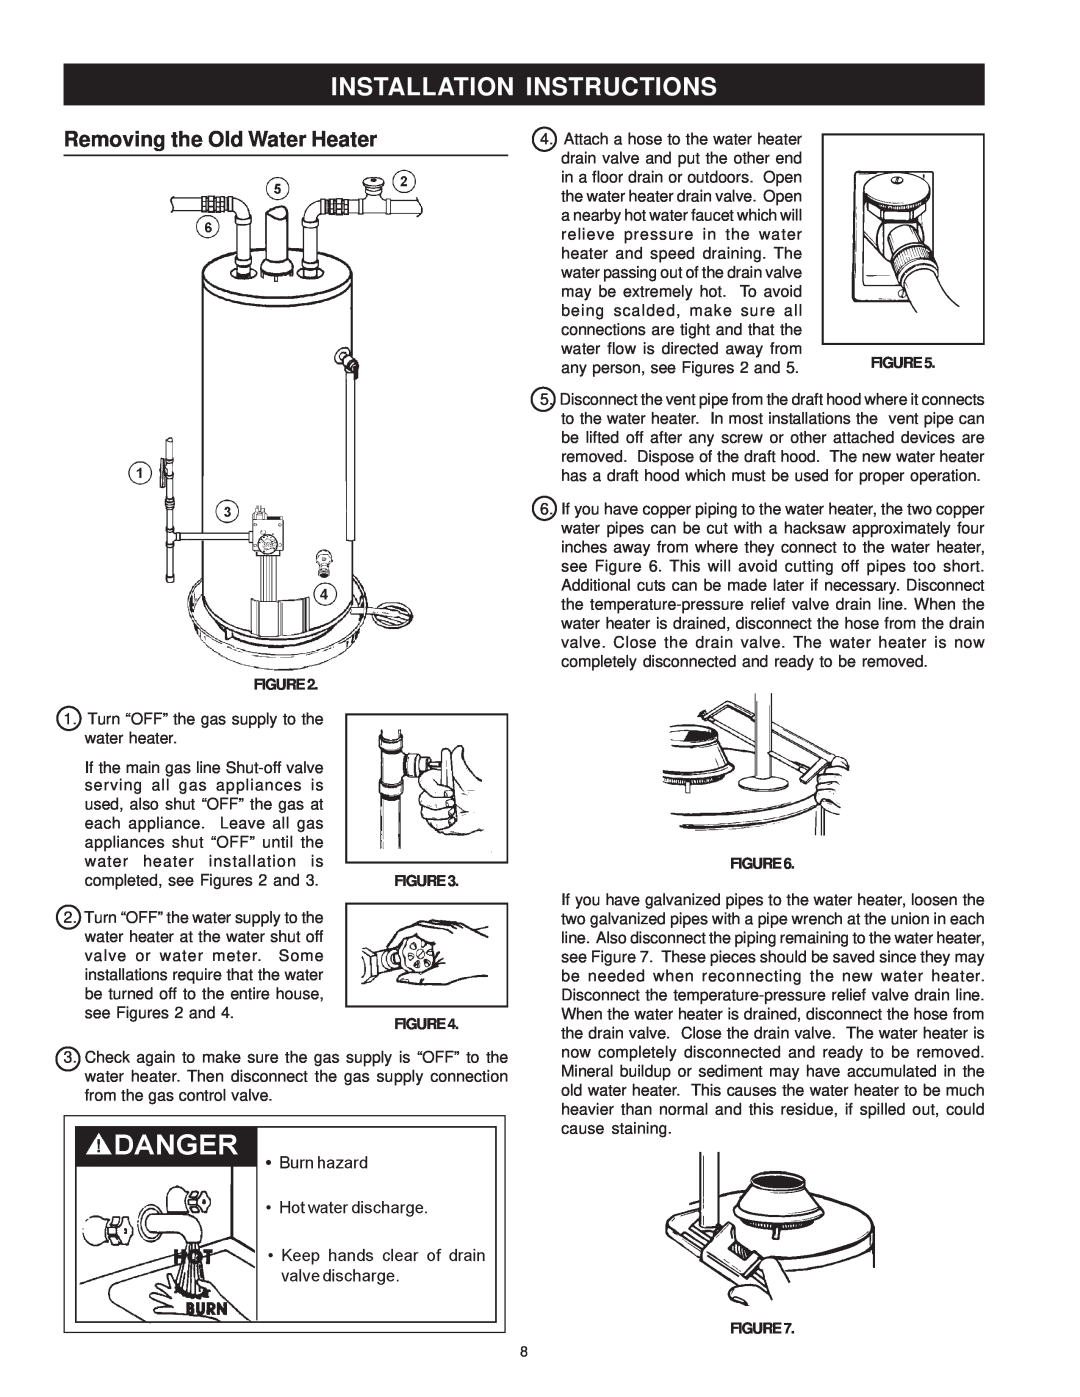 Sears 153.336566 50 GALLON, 153.336162, 153.336466 40 GALLON Installation Instructions, Removing the Old Water Heater 